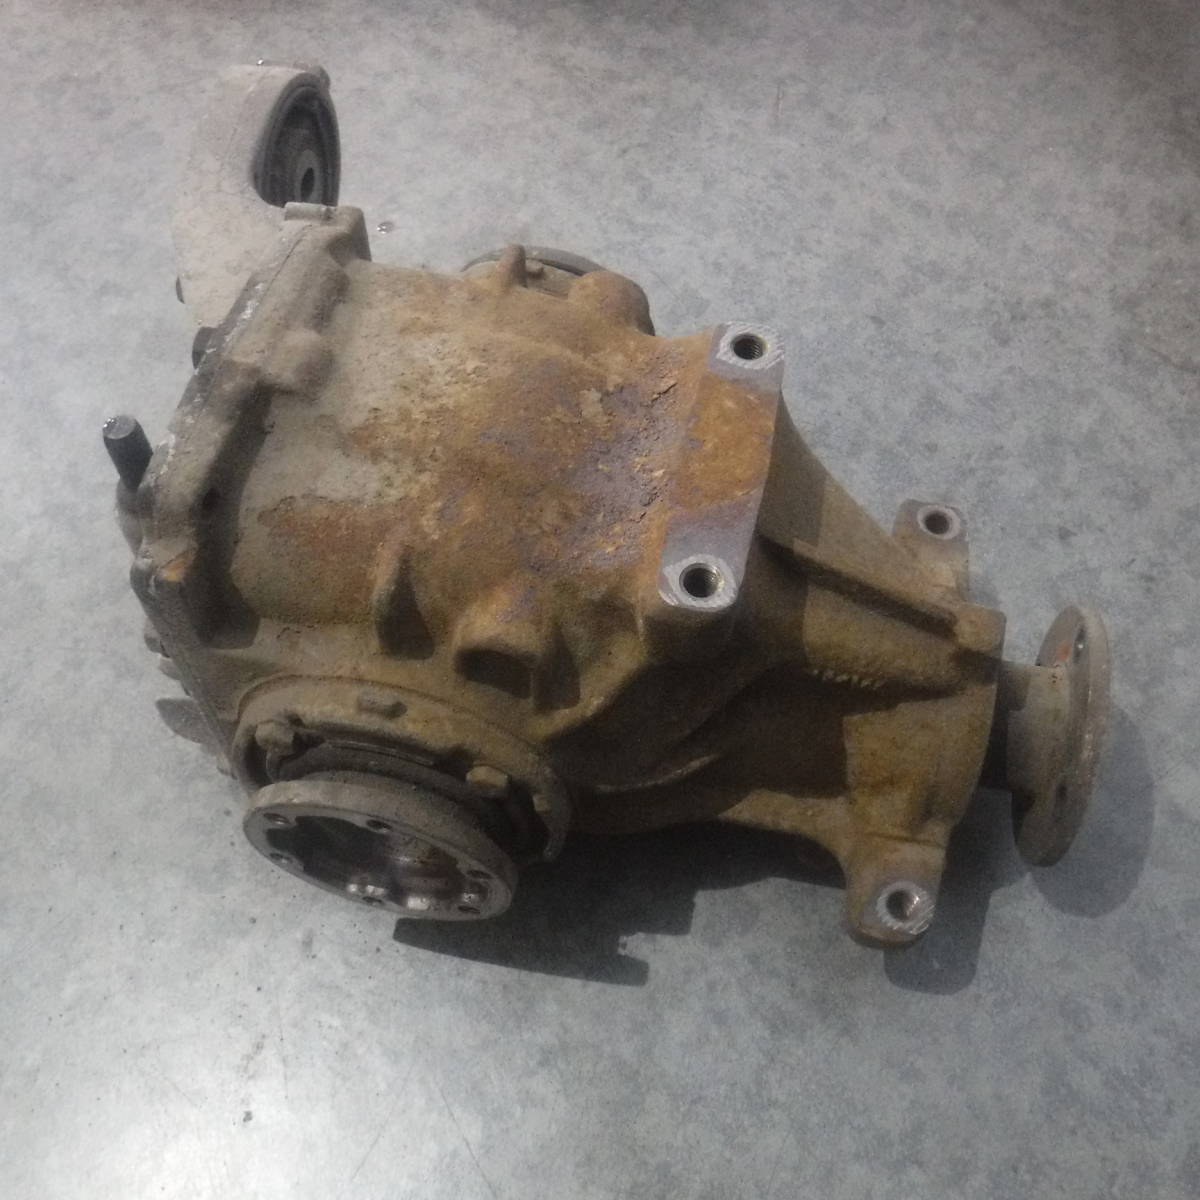 BMW 318ti compact 3 series E36 Z3 2.0 1.9 M44 1.8 M42 rear diff 4.44 final original rear differential gear differential gear part removing car equipped 